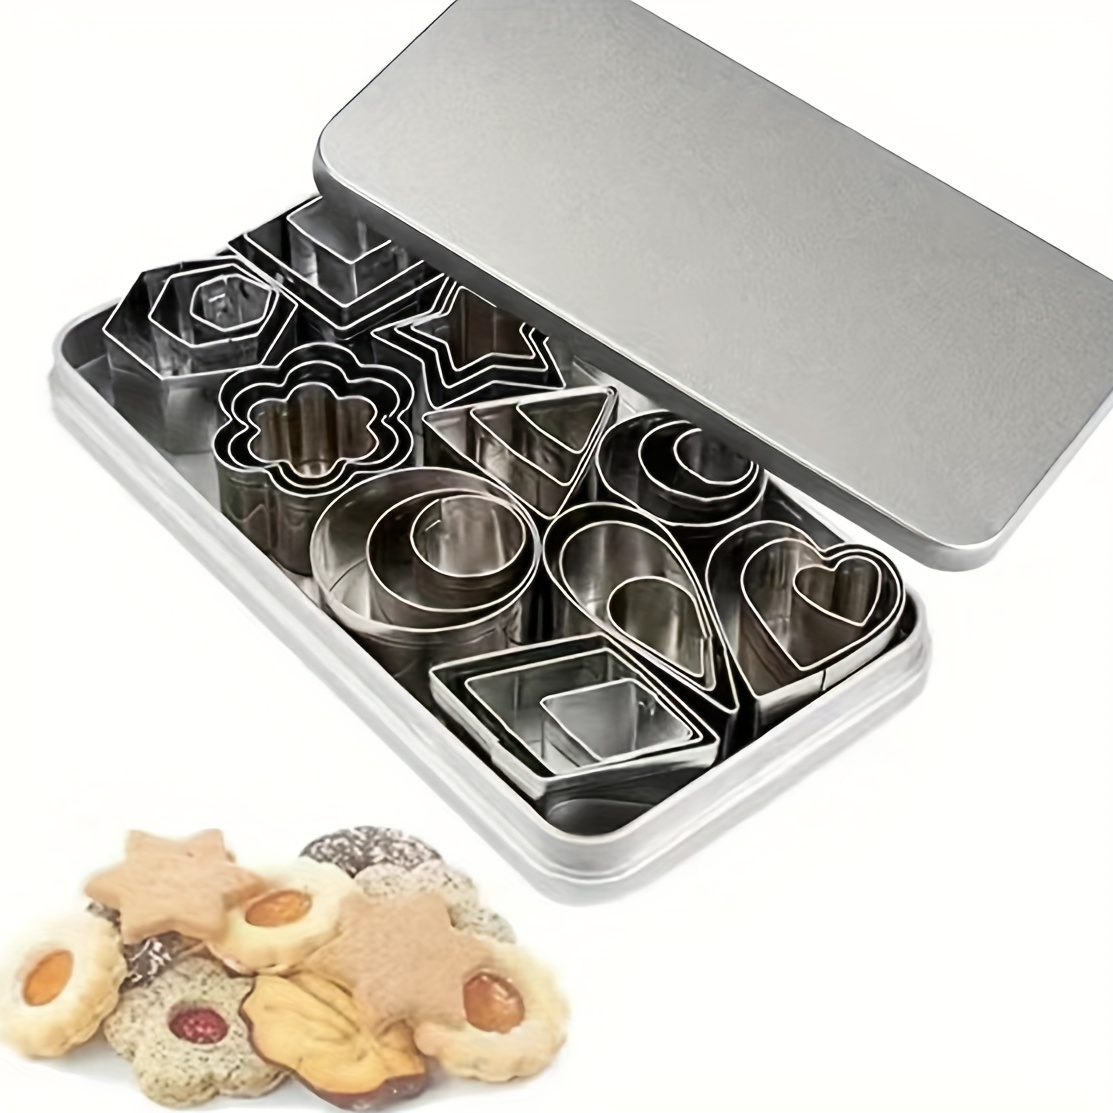 DIY Cookie Mould Cookie Cutter Set Baking Cake Stainless Steel Classic